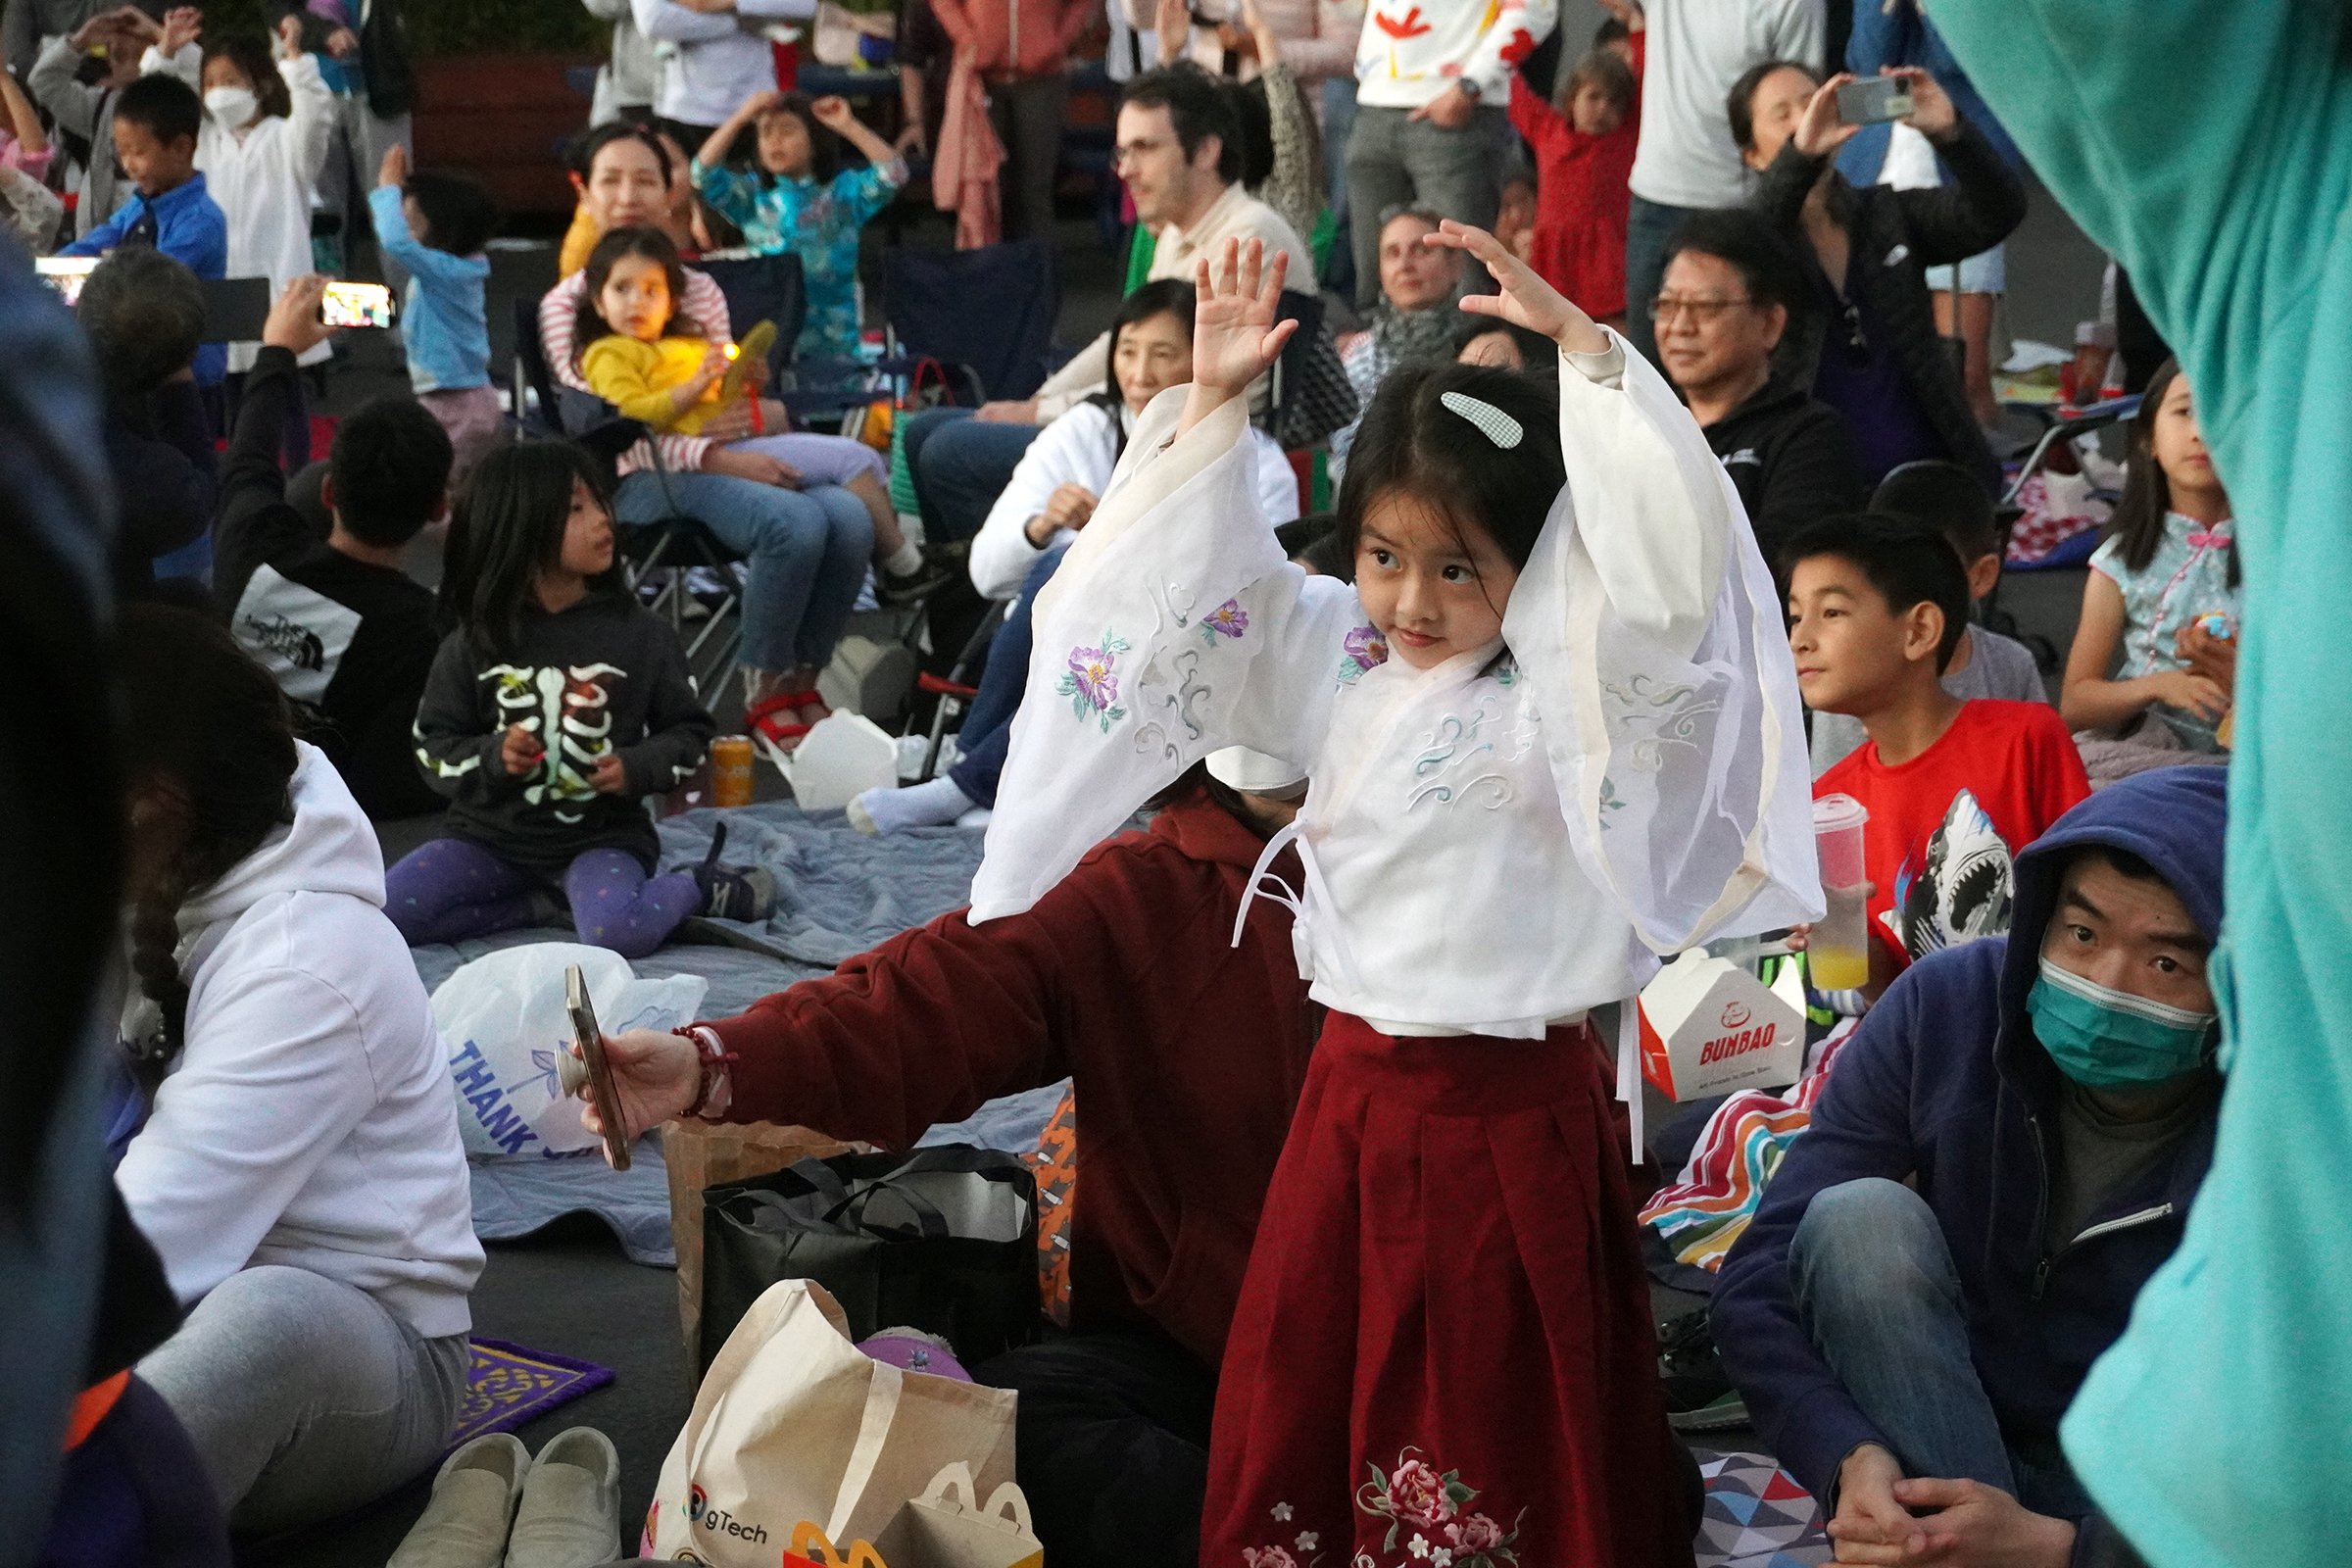 Celebrating the moon festival with a traditional dance to Lady Moon.